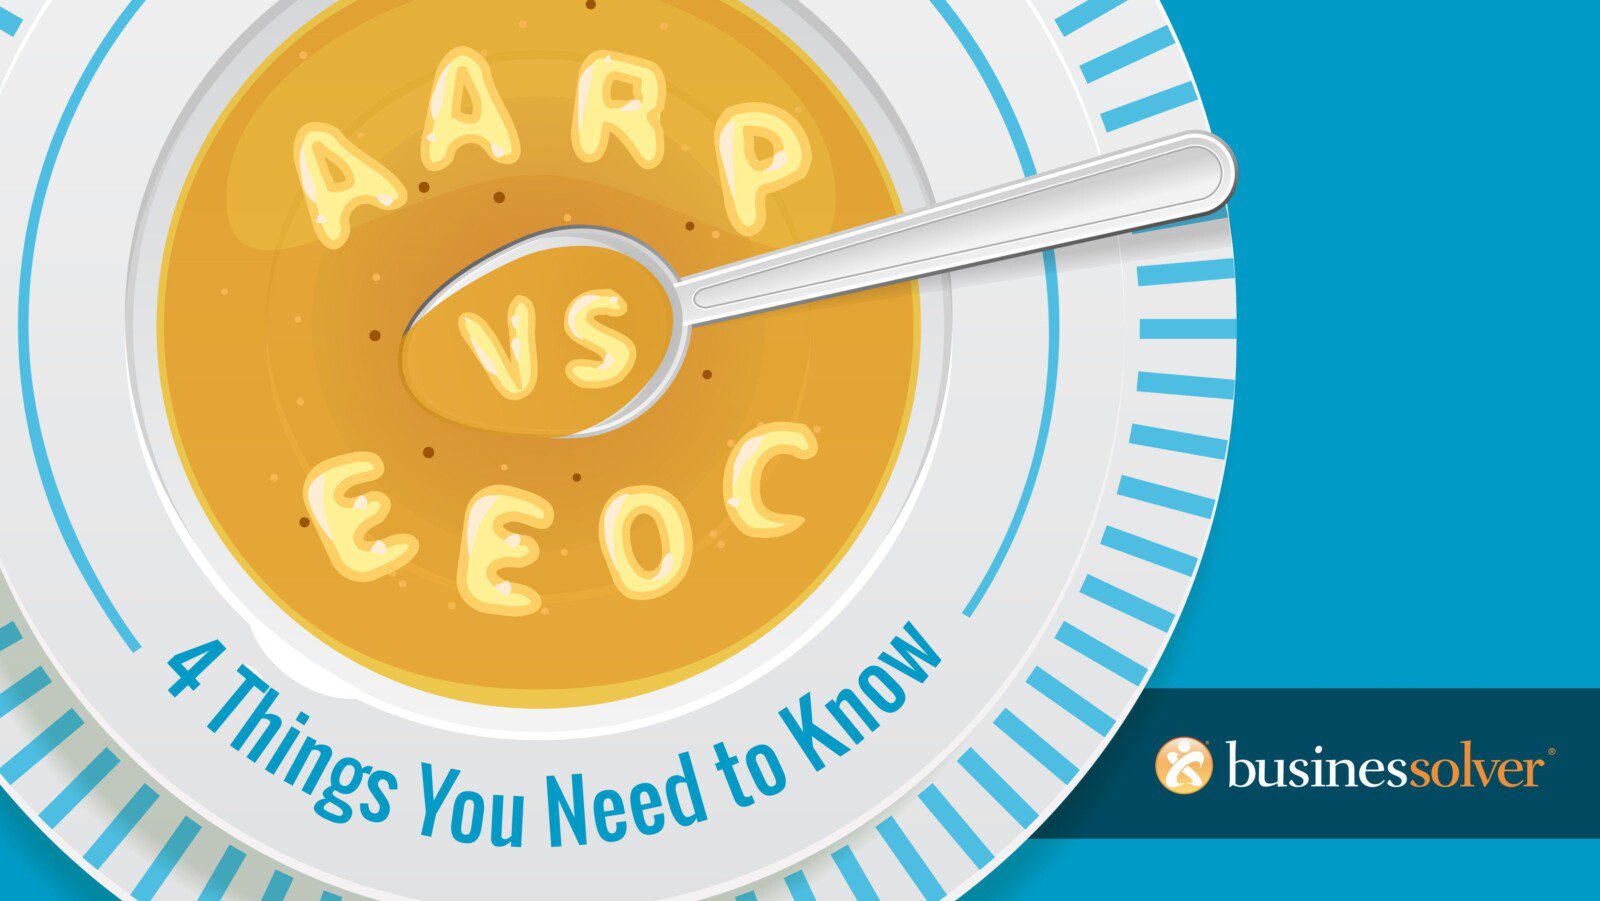 AARP vs. EEOC: What Happened, and What’s Next?